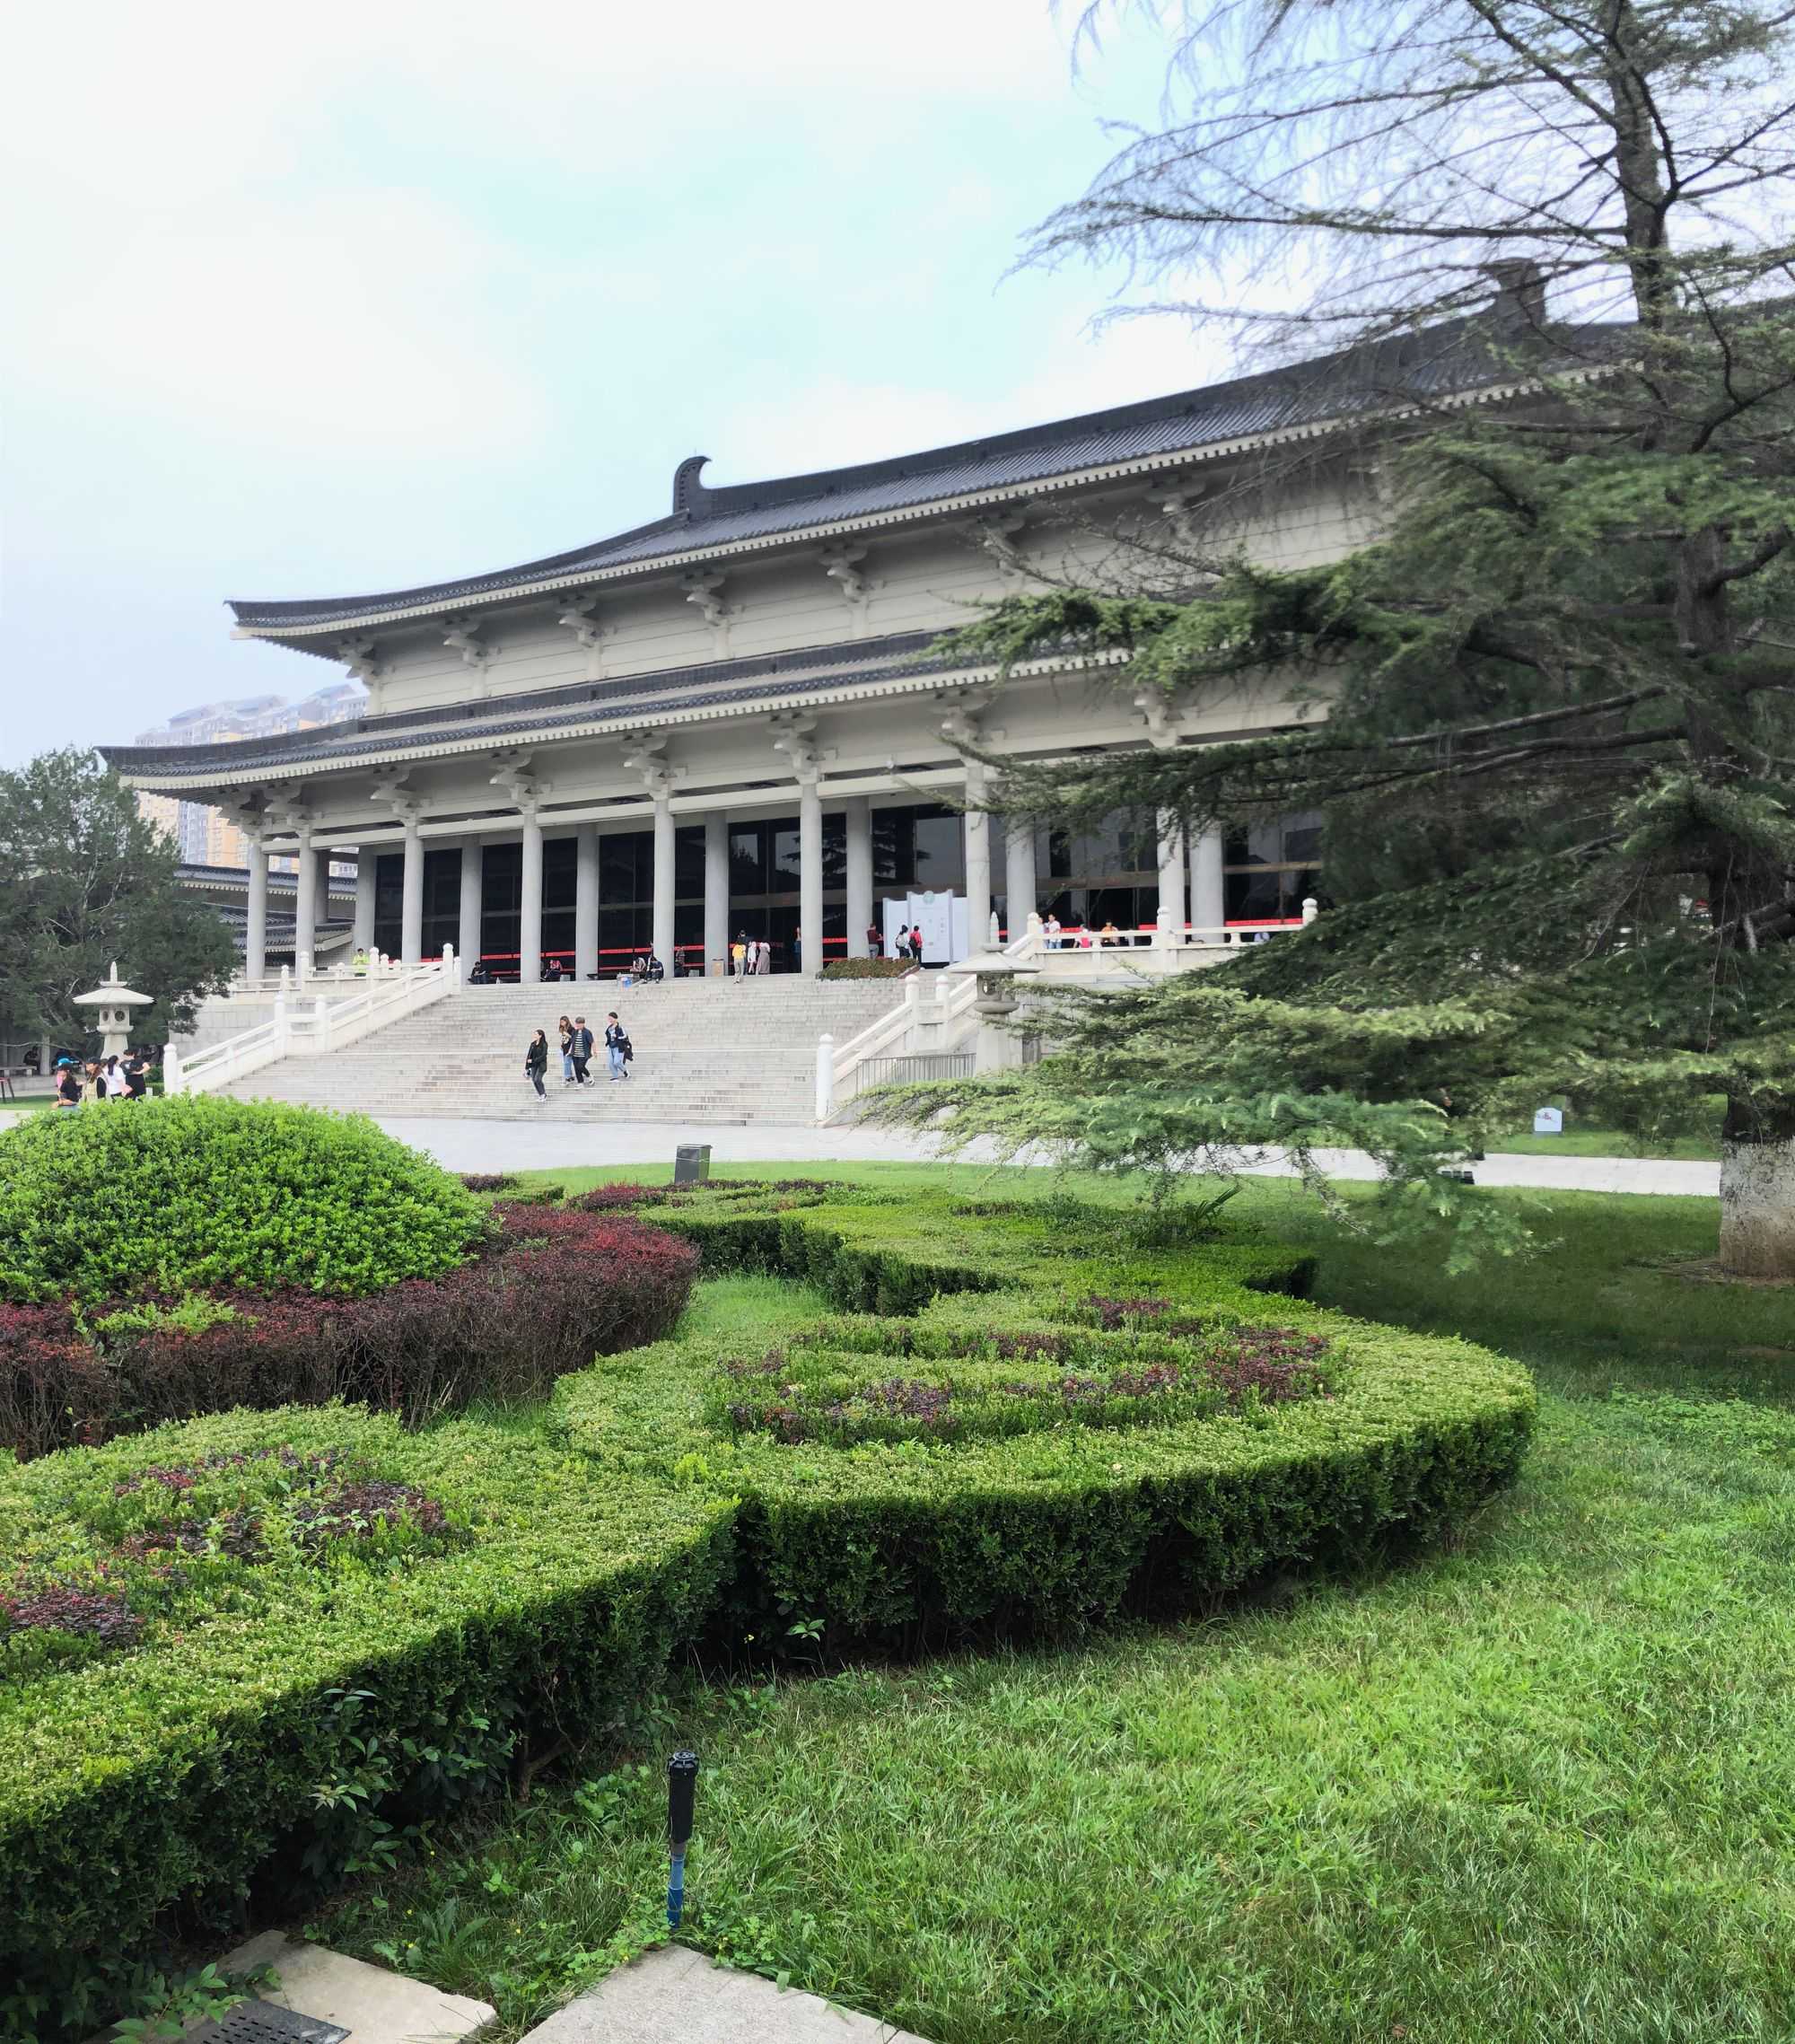 Shaanxi History Museum (陕西历史博物馆) (Image by author)